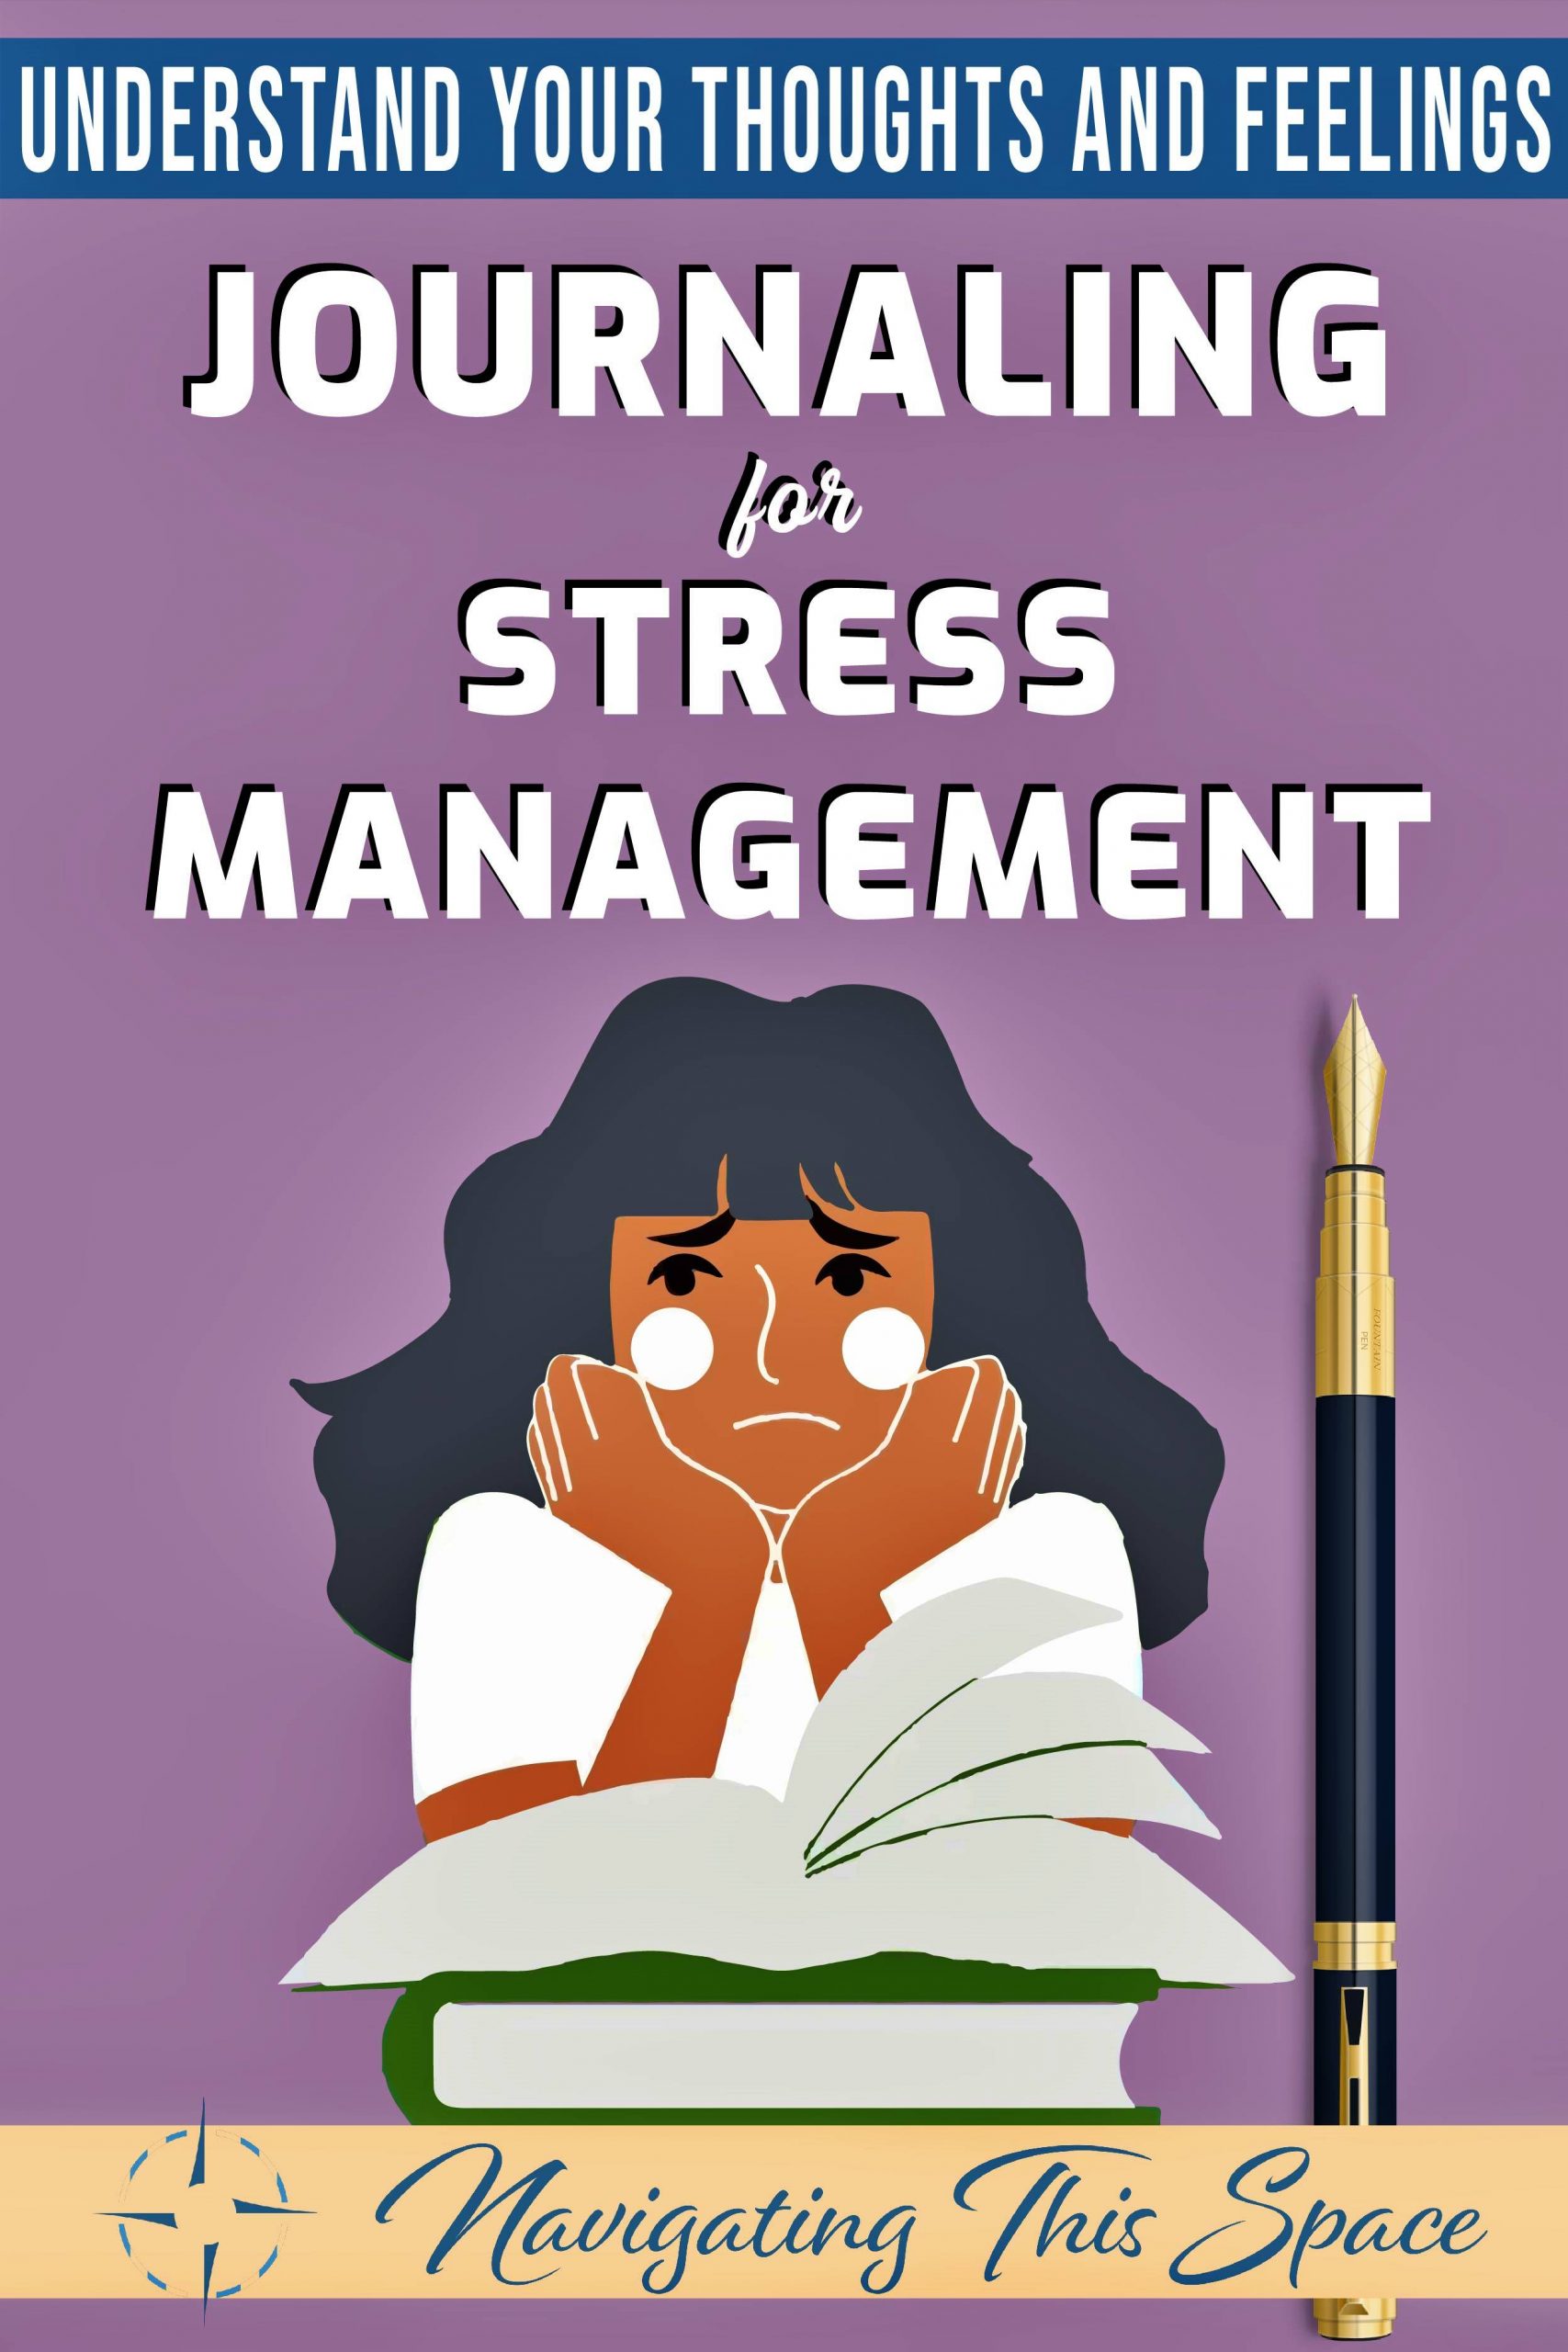 Understand your thoughts and feelings - Journaling for stress management